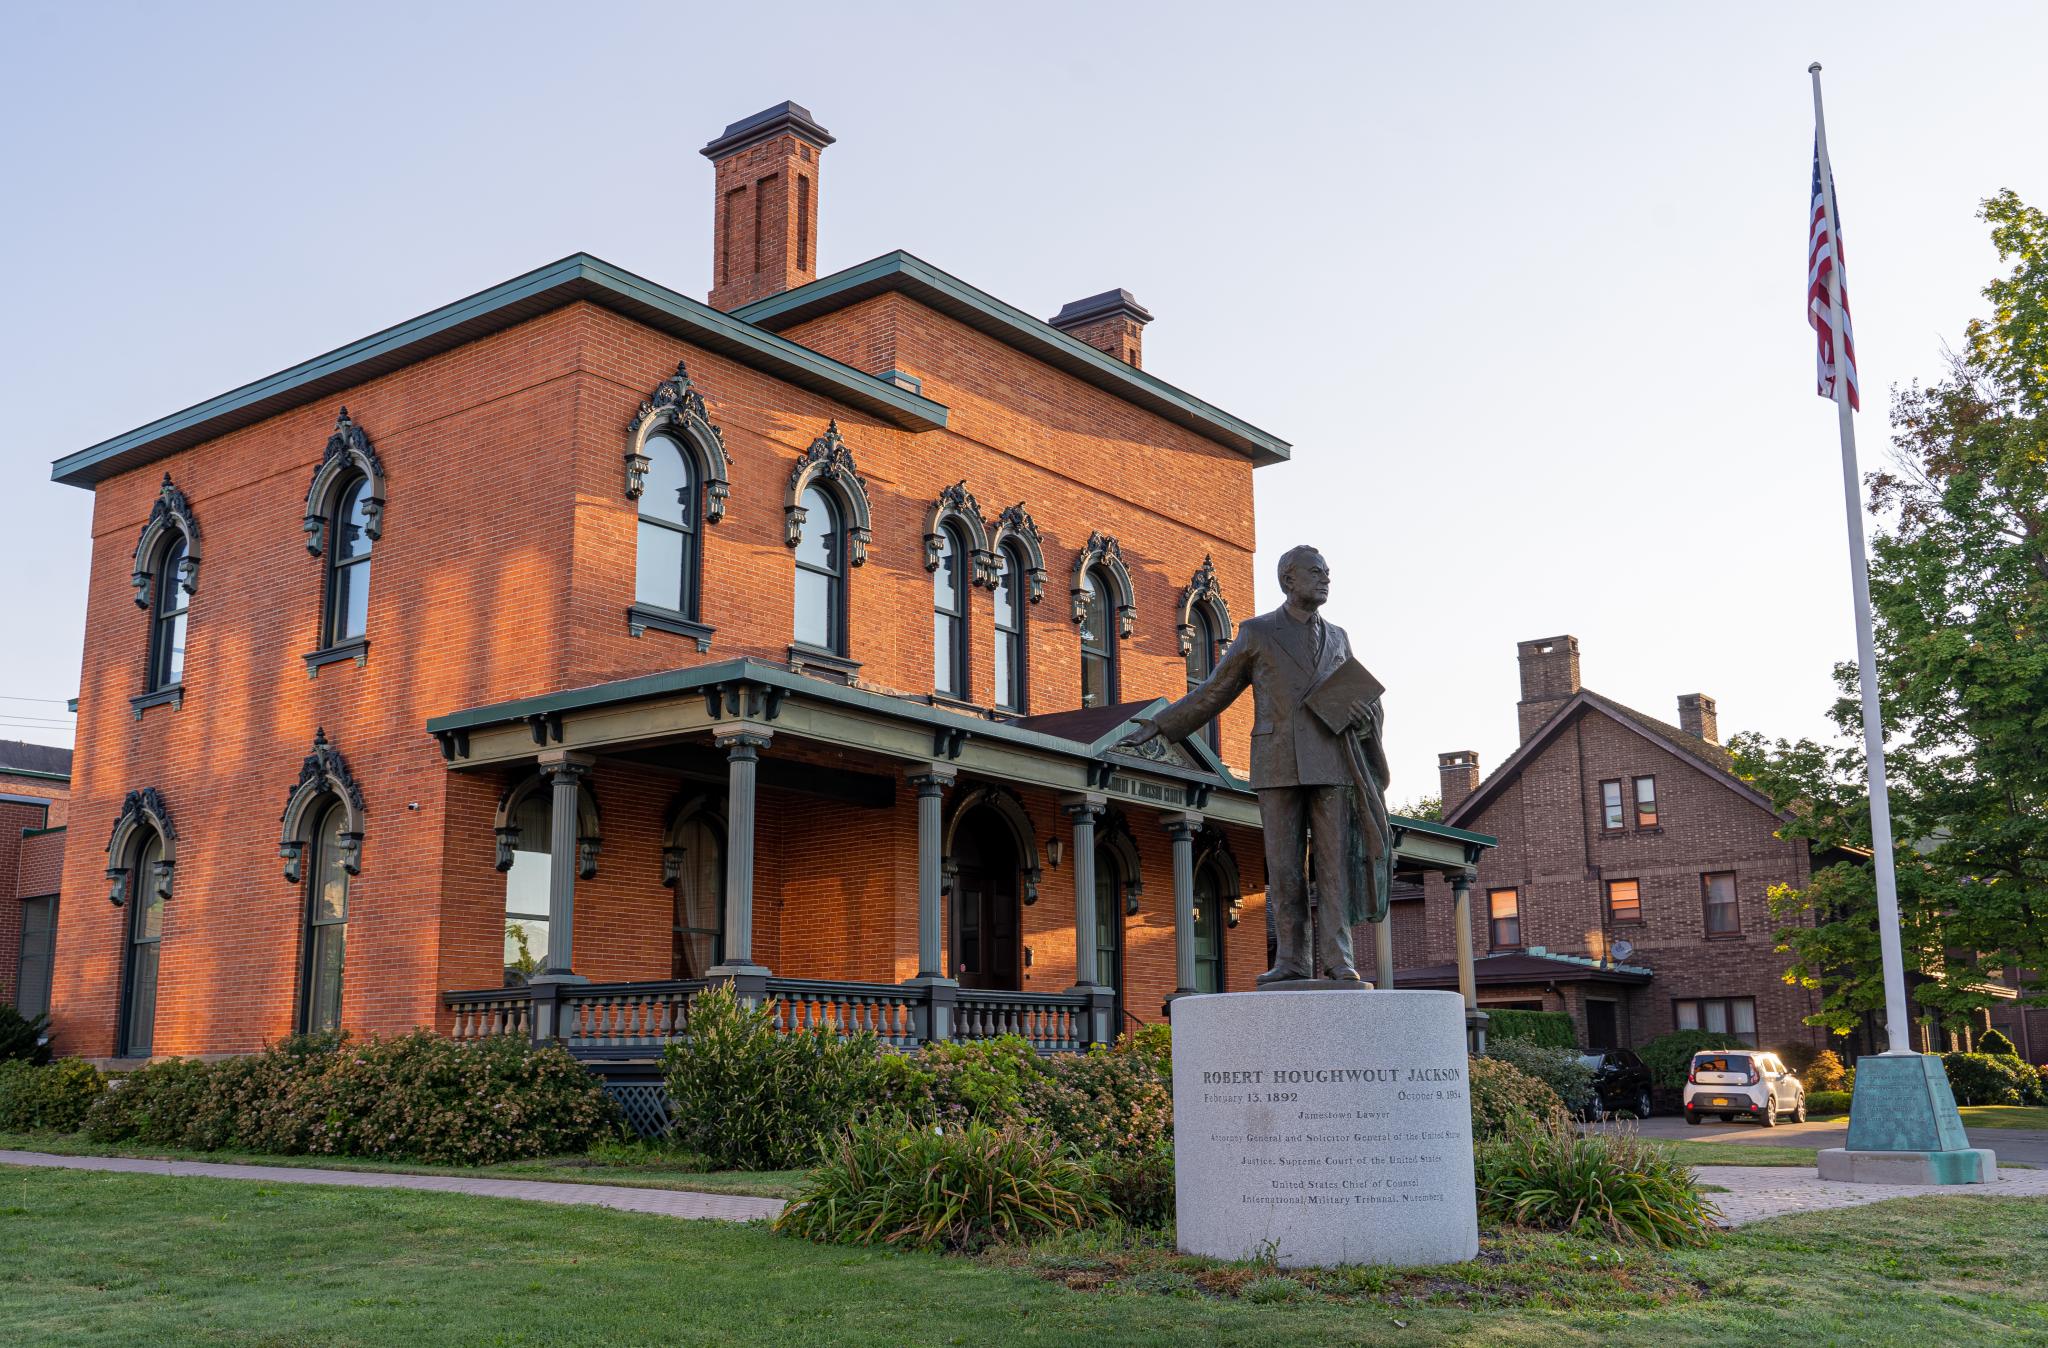 Robert H. Jackson Center - The Robert H. Jackson Center in Jamestown received funding from CCPEG’s 2024 Grant Program that will help cover the cost of its planning and conceptual design efforts for its museum space.